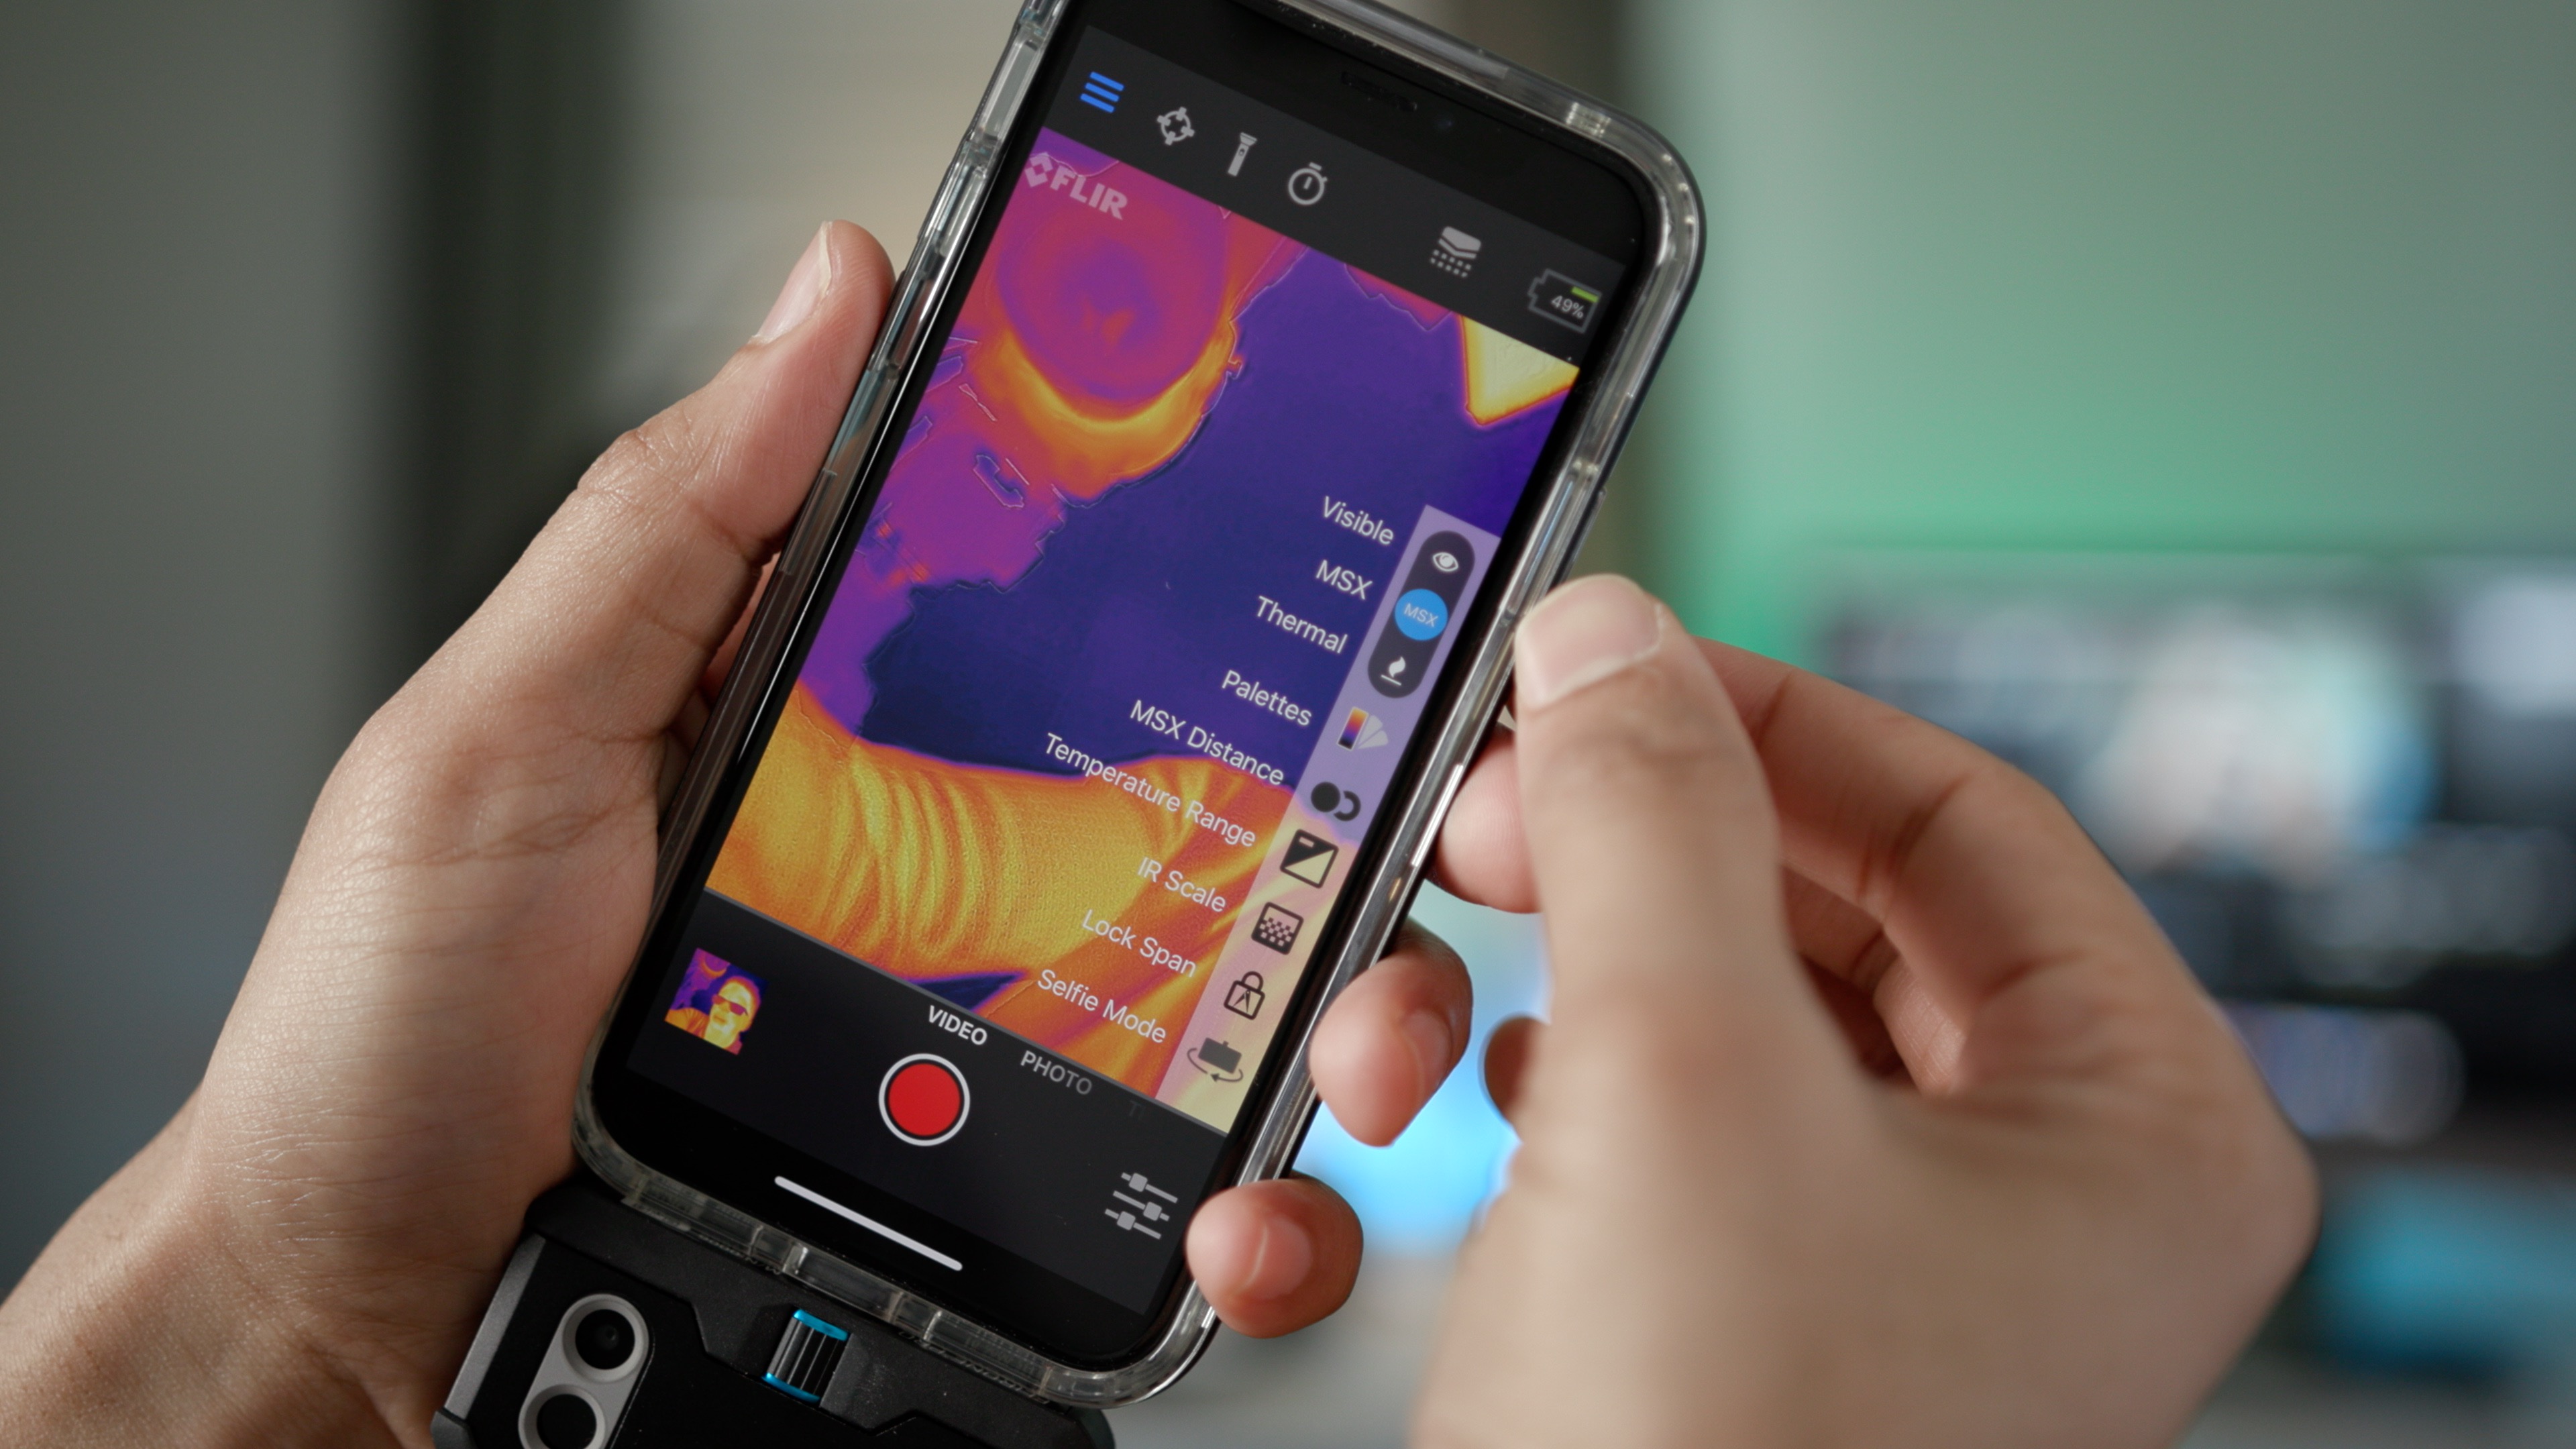 Flir One infrared attachment turns your phone into a Predator with thermal  vision - PhoneArena